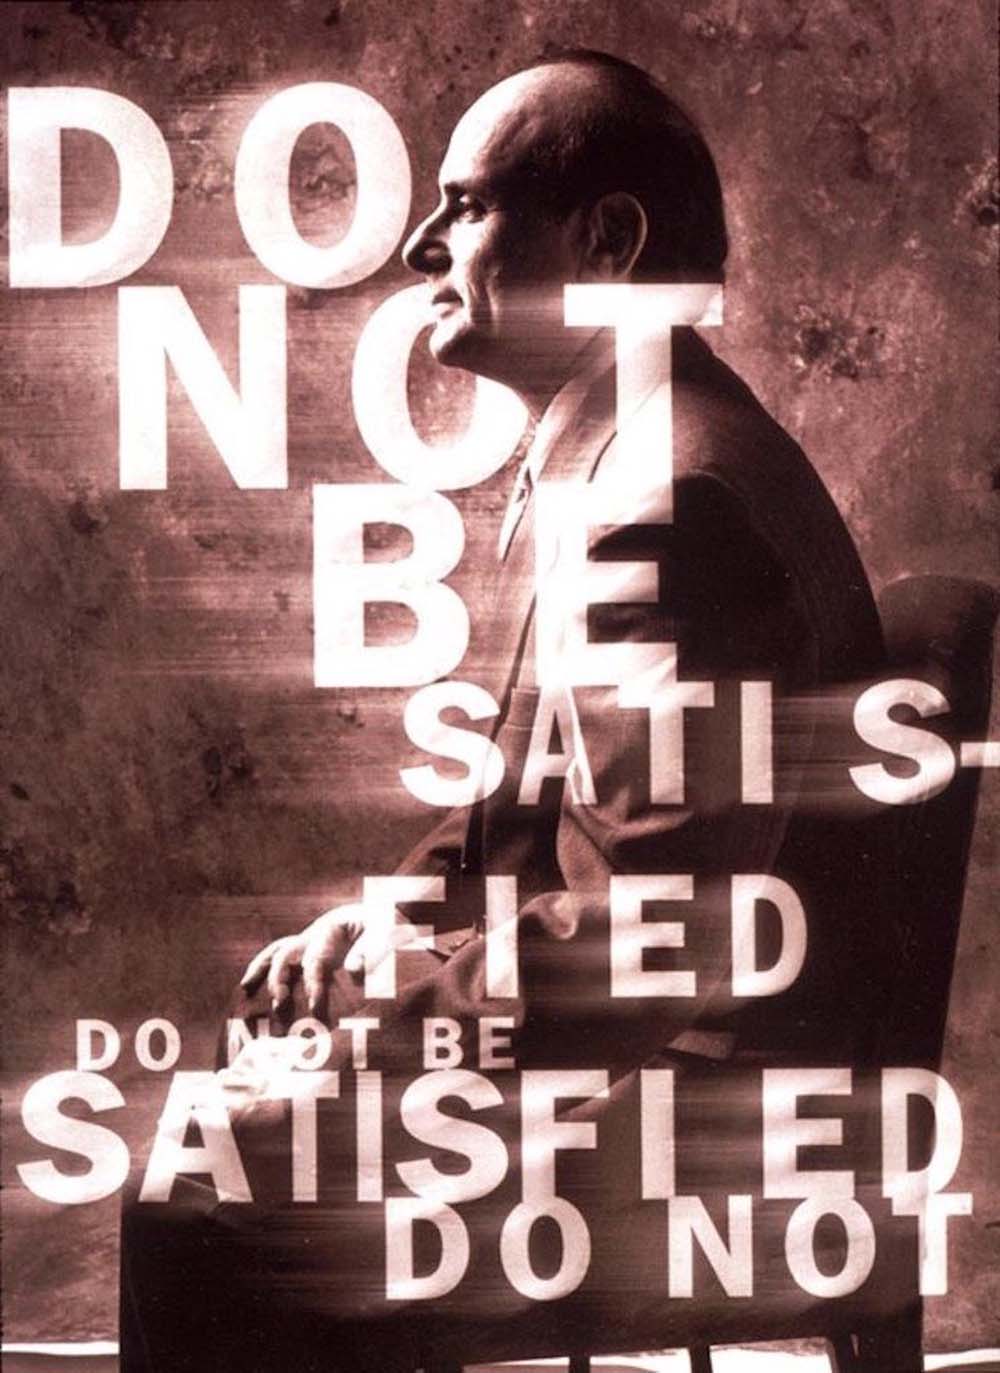 david carson do not be poster